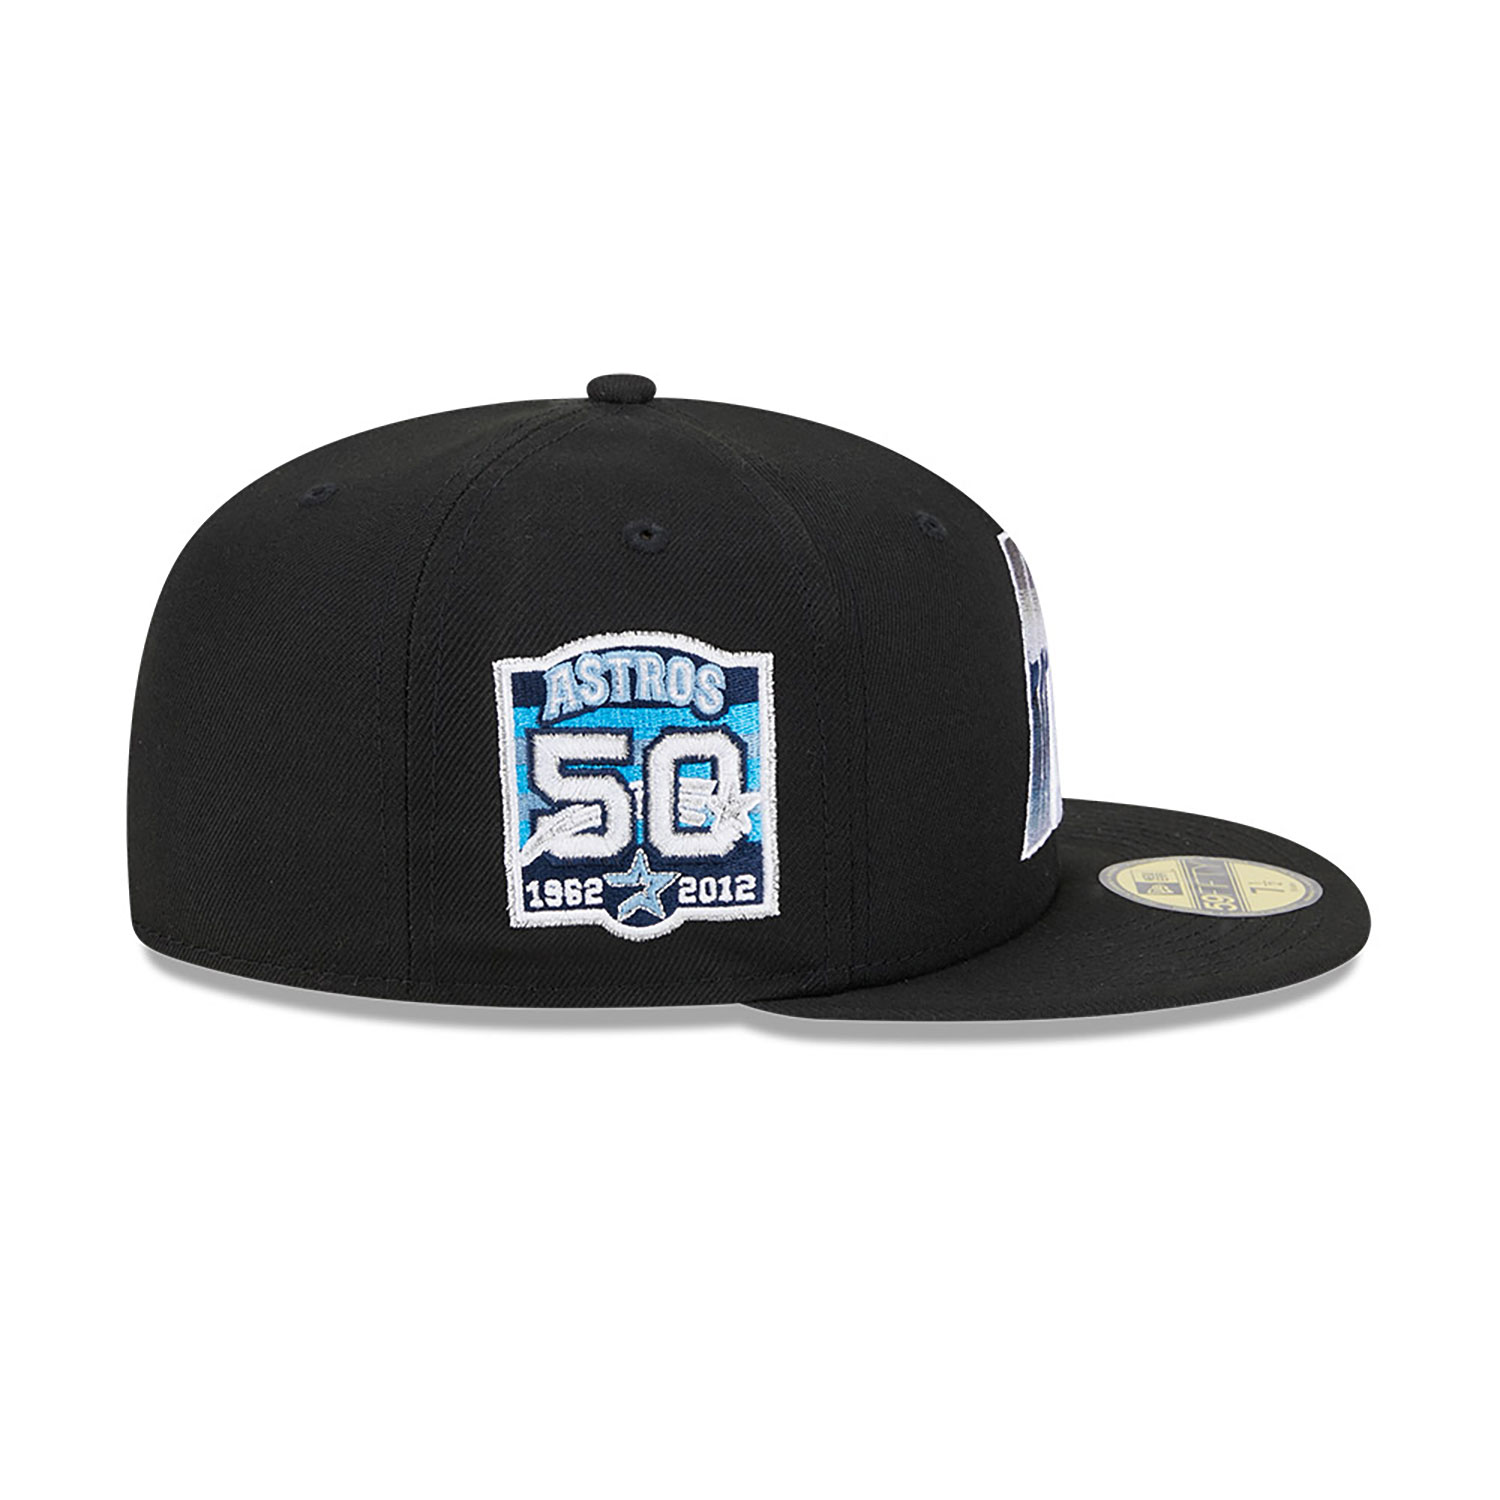 Houston Astros Raceway Black 59FIFTY Fitted Cap